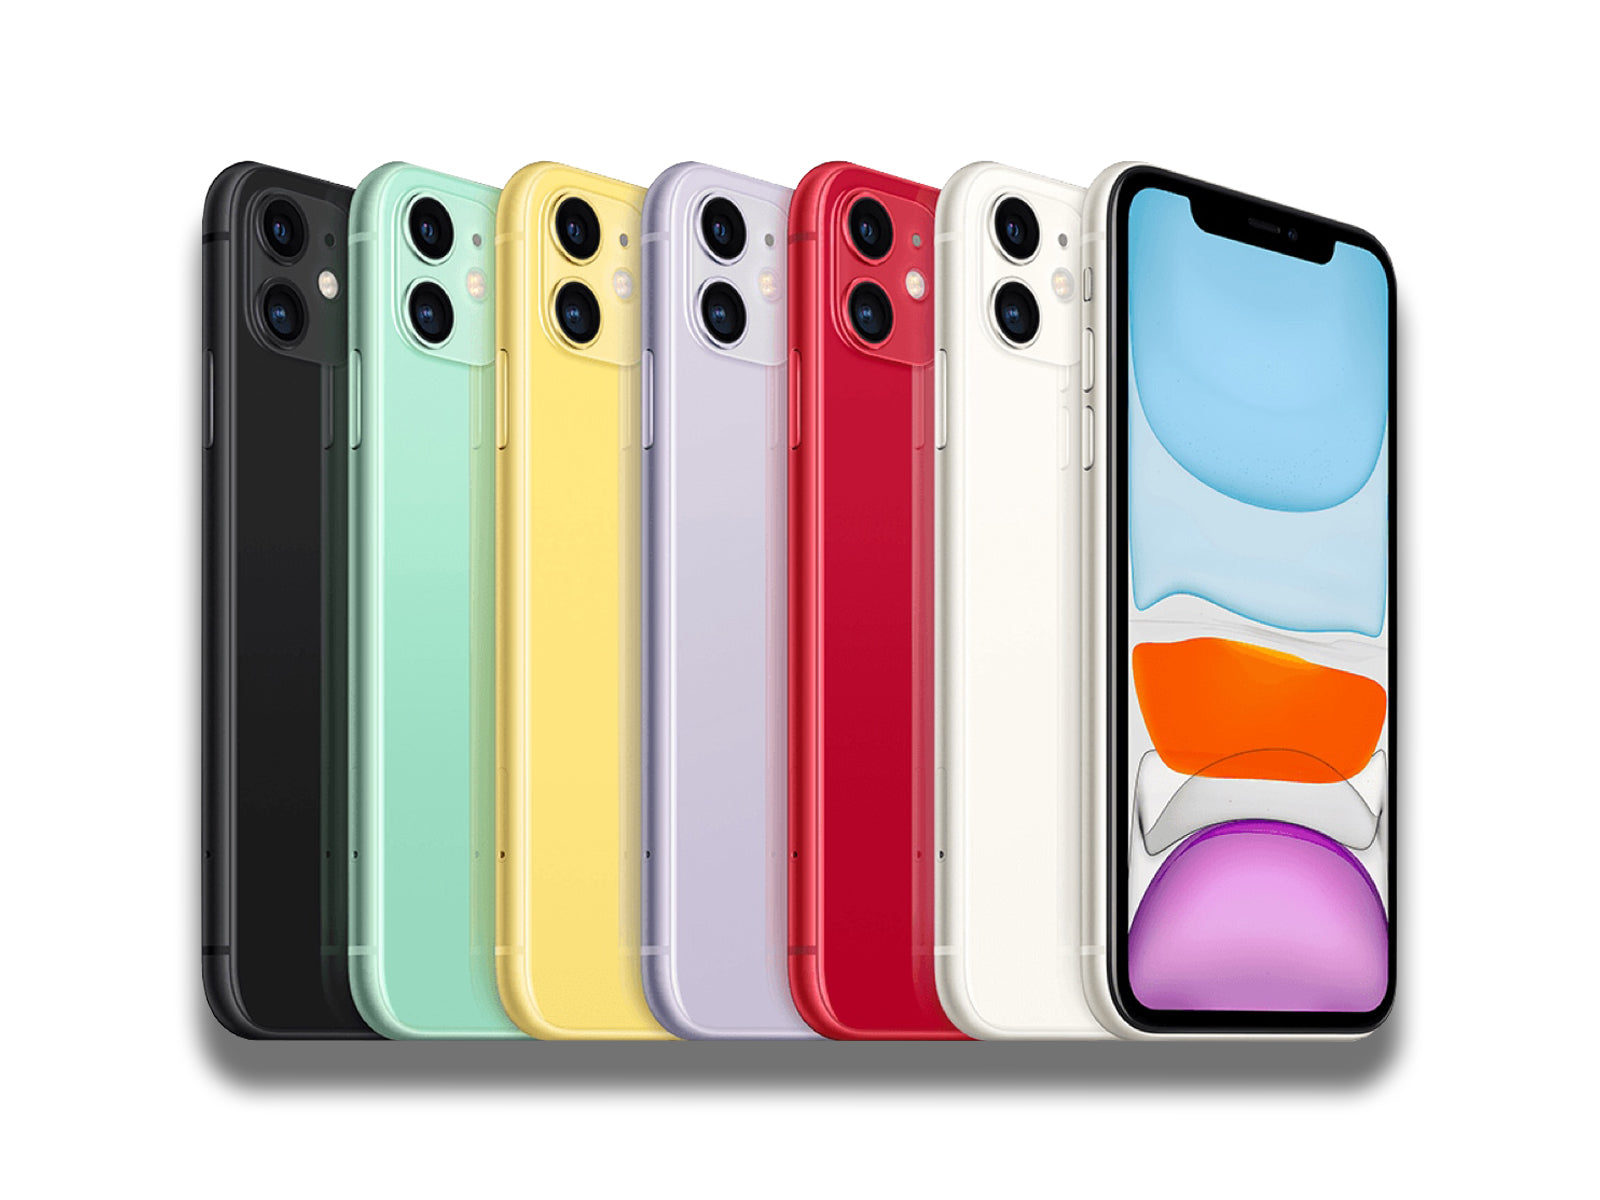 Image shows an angled view of all colours of the iPhone 11